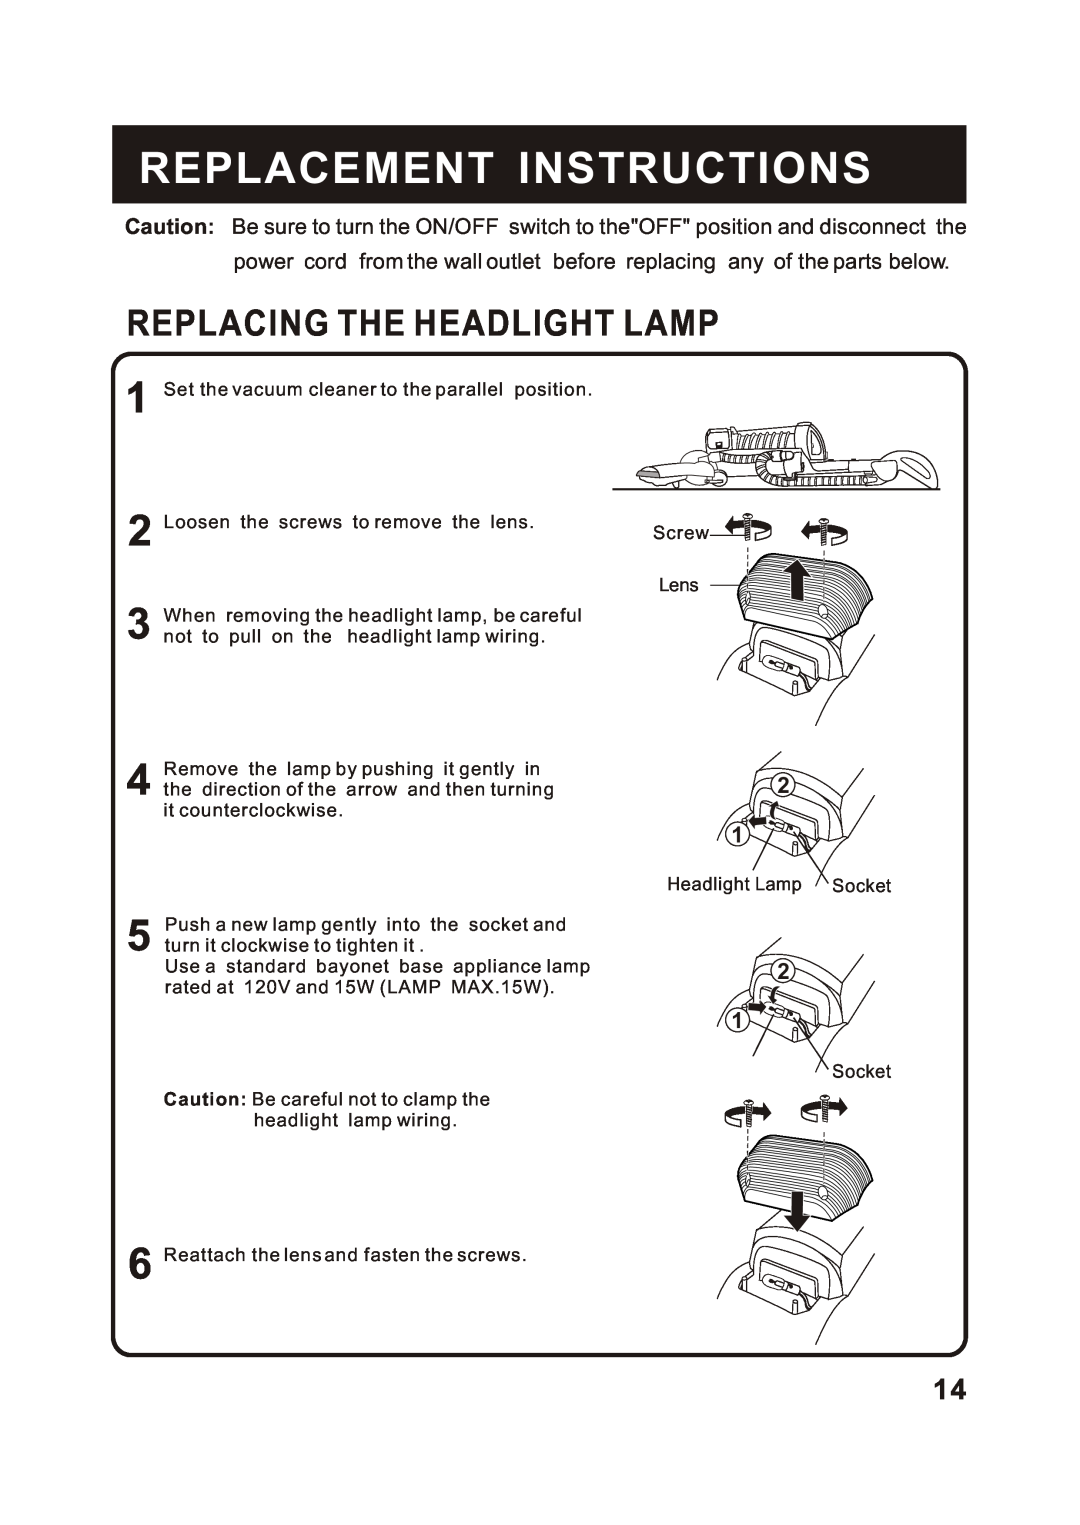 Fantom Vacuum FM744H instruction manual Replacement Instructions, Replacing The Headlight Lamp 